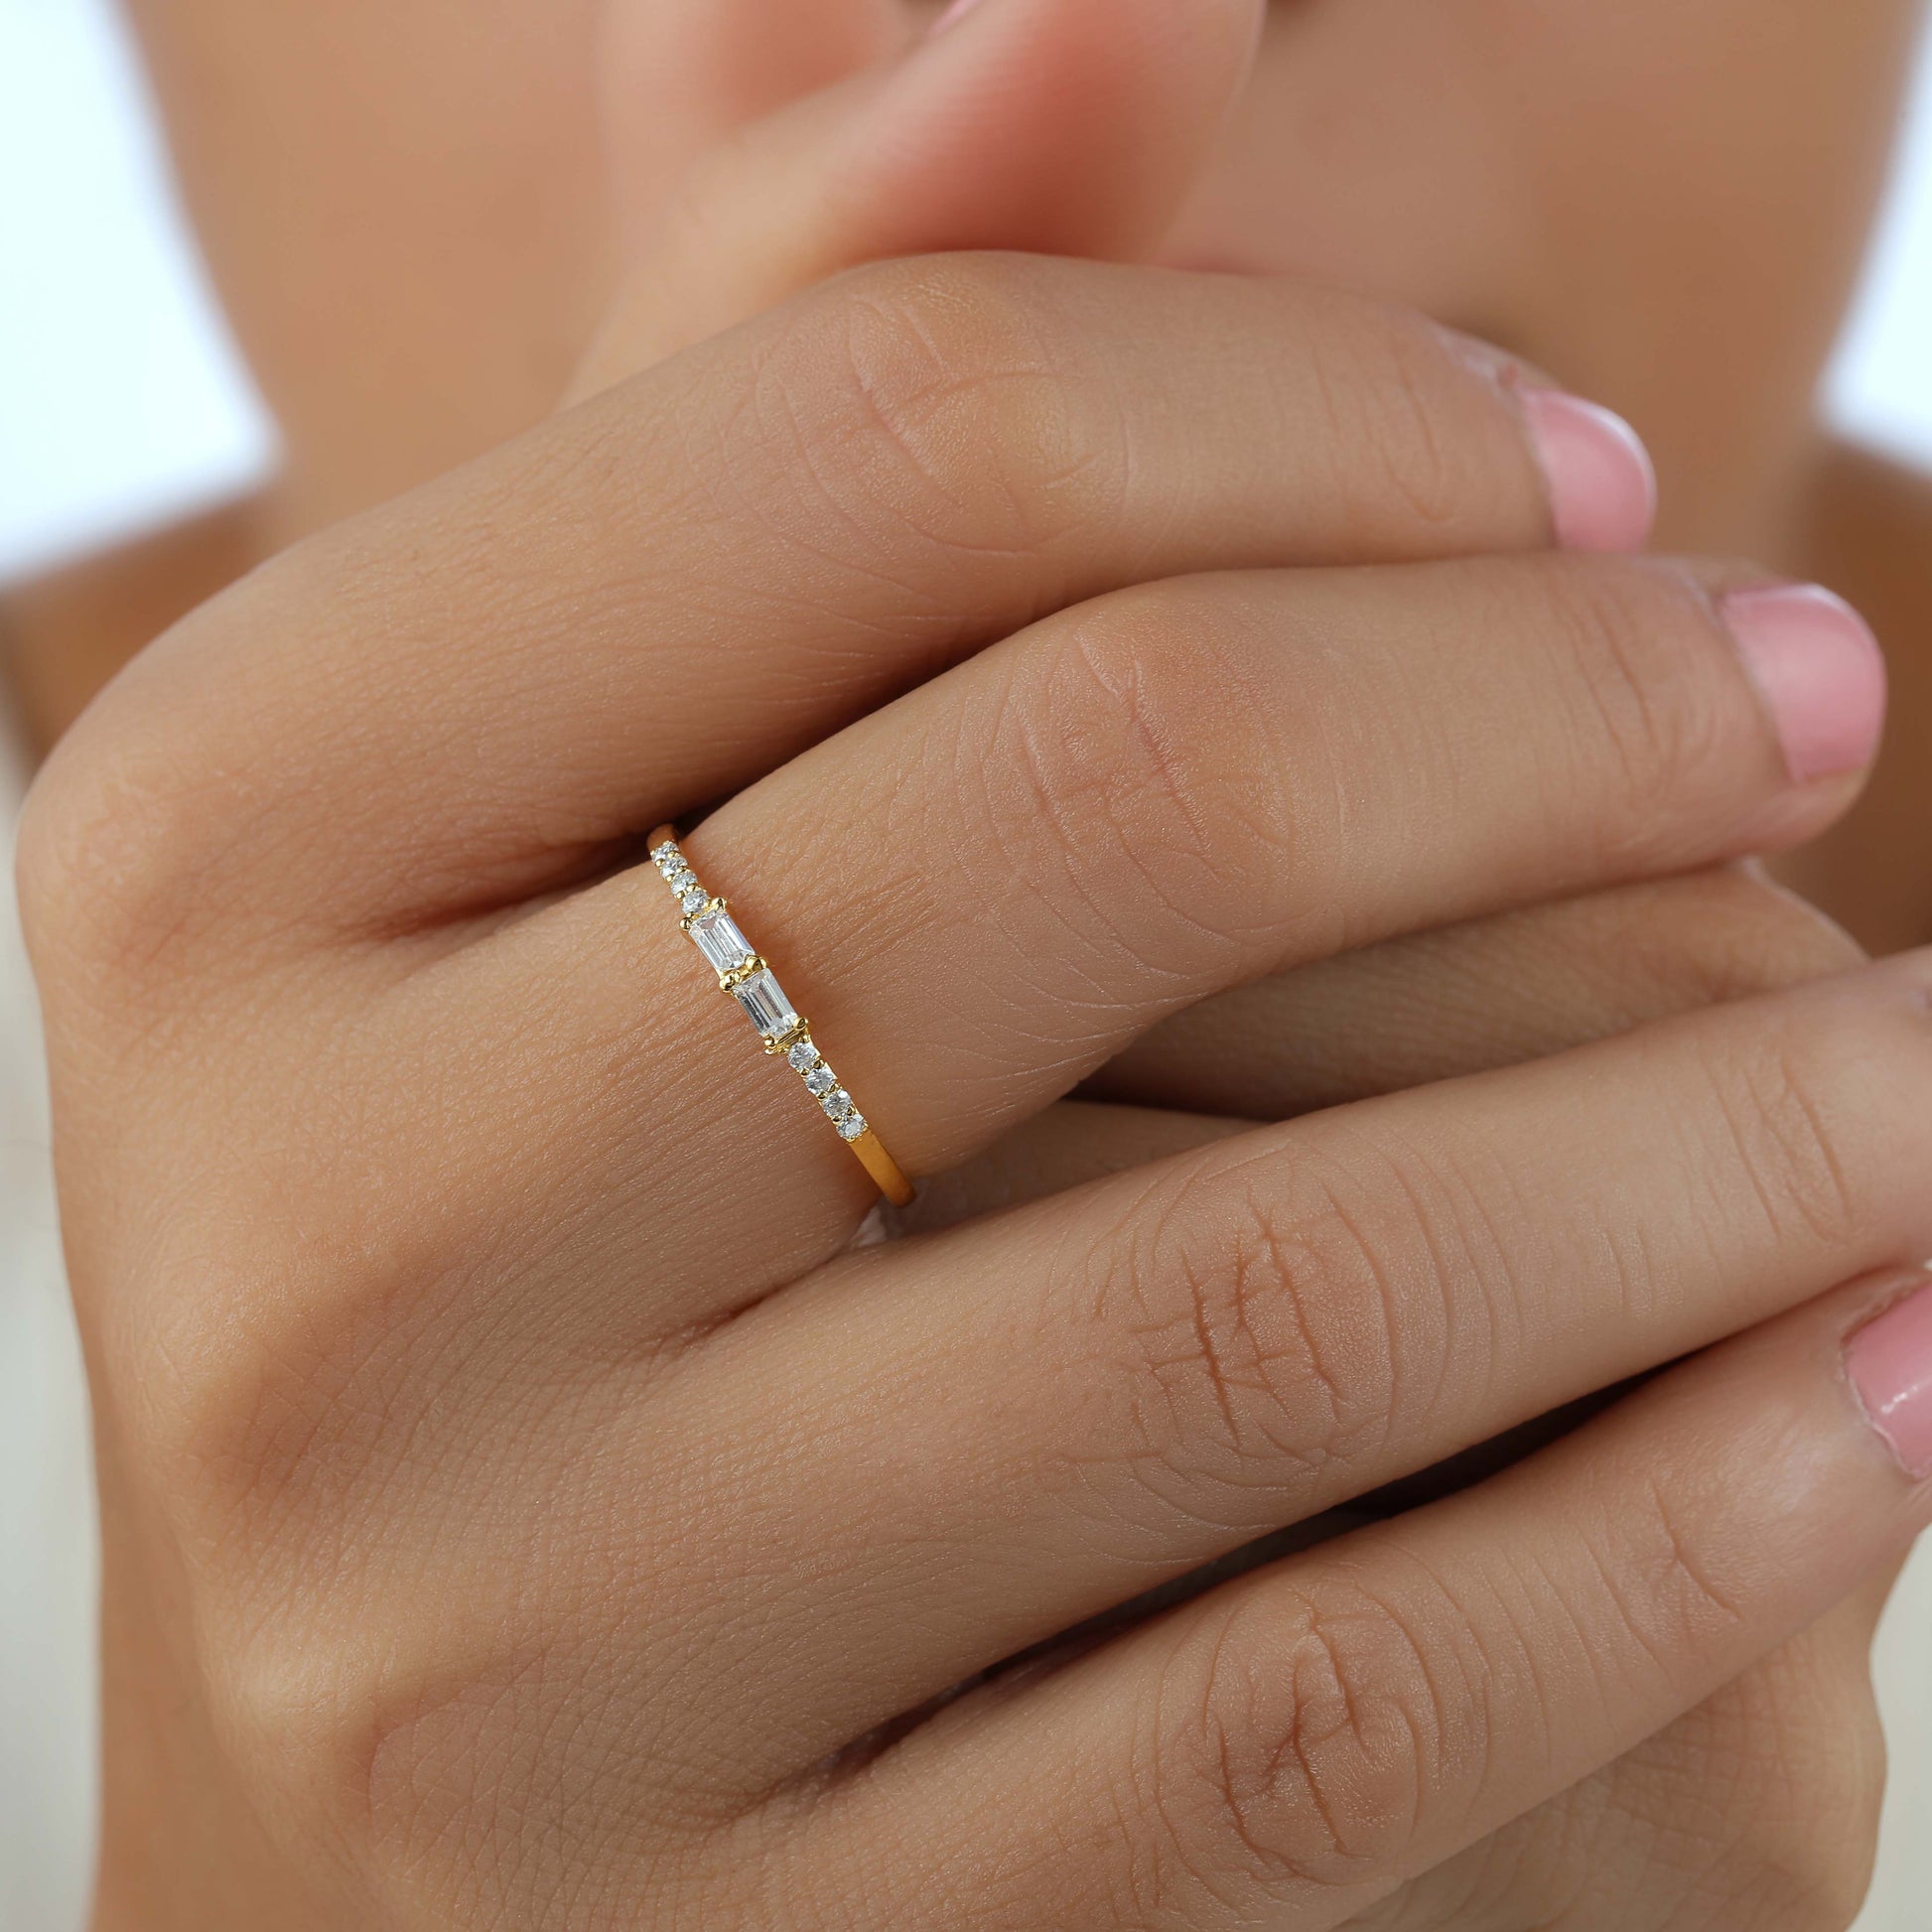 Baguette and diamond ring